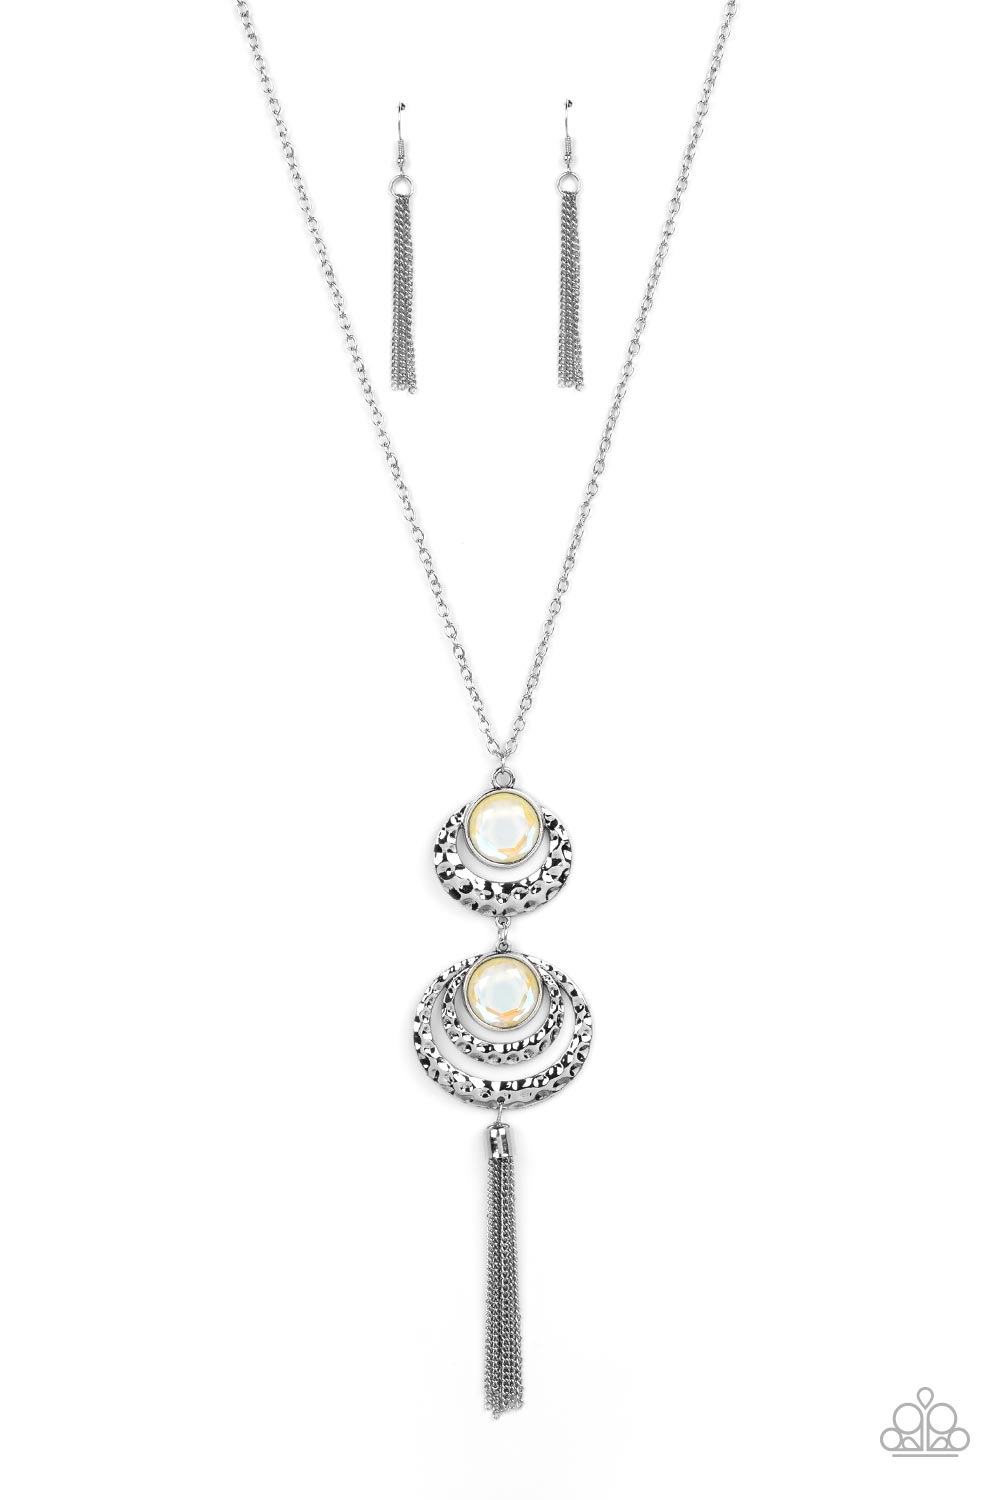 Paparazzi - Limitless Luster - Yellow Necklace - Alies Bling Bar